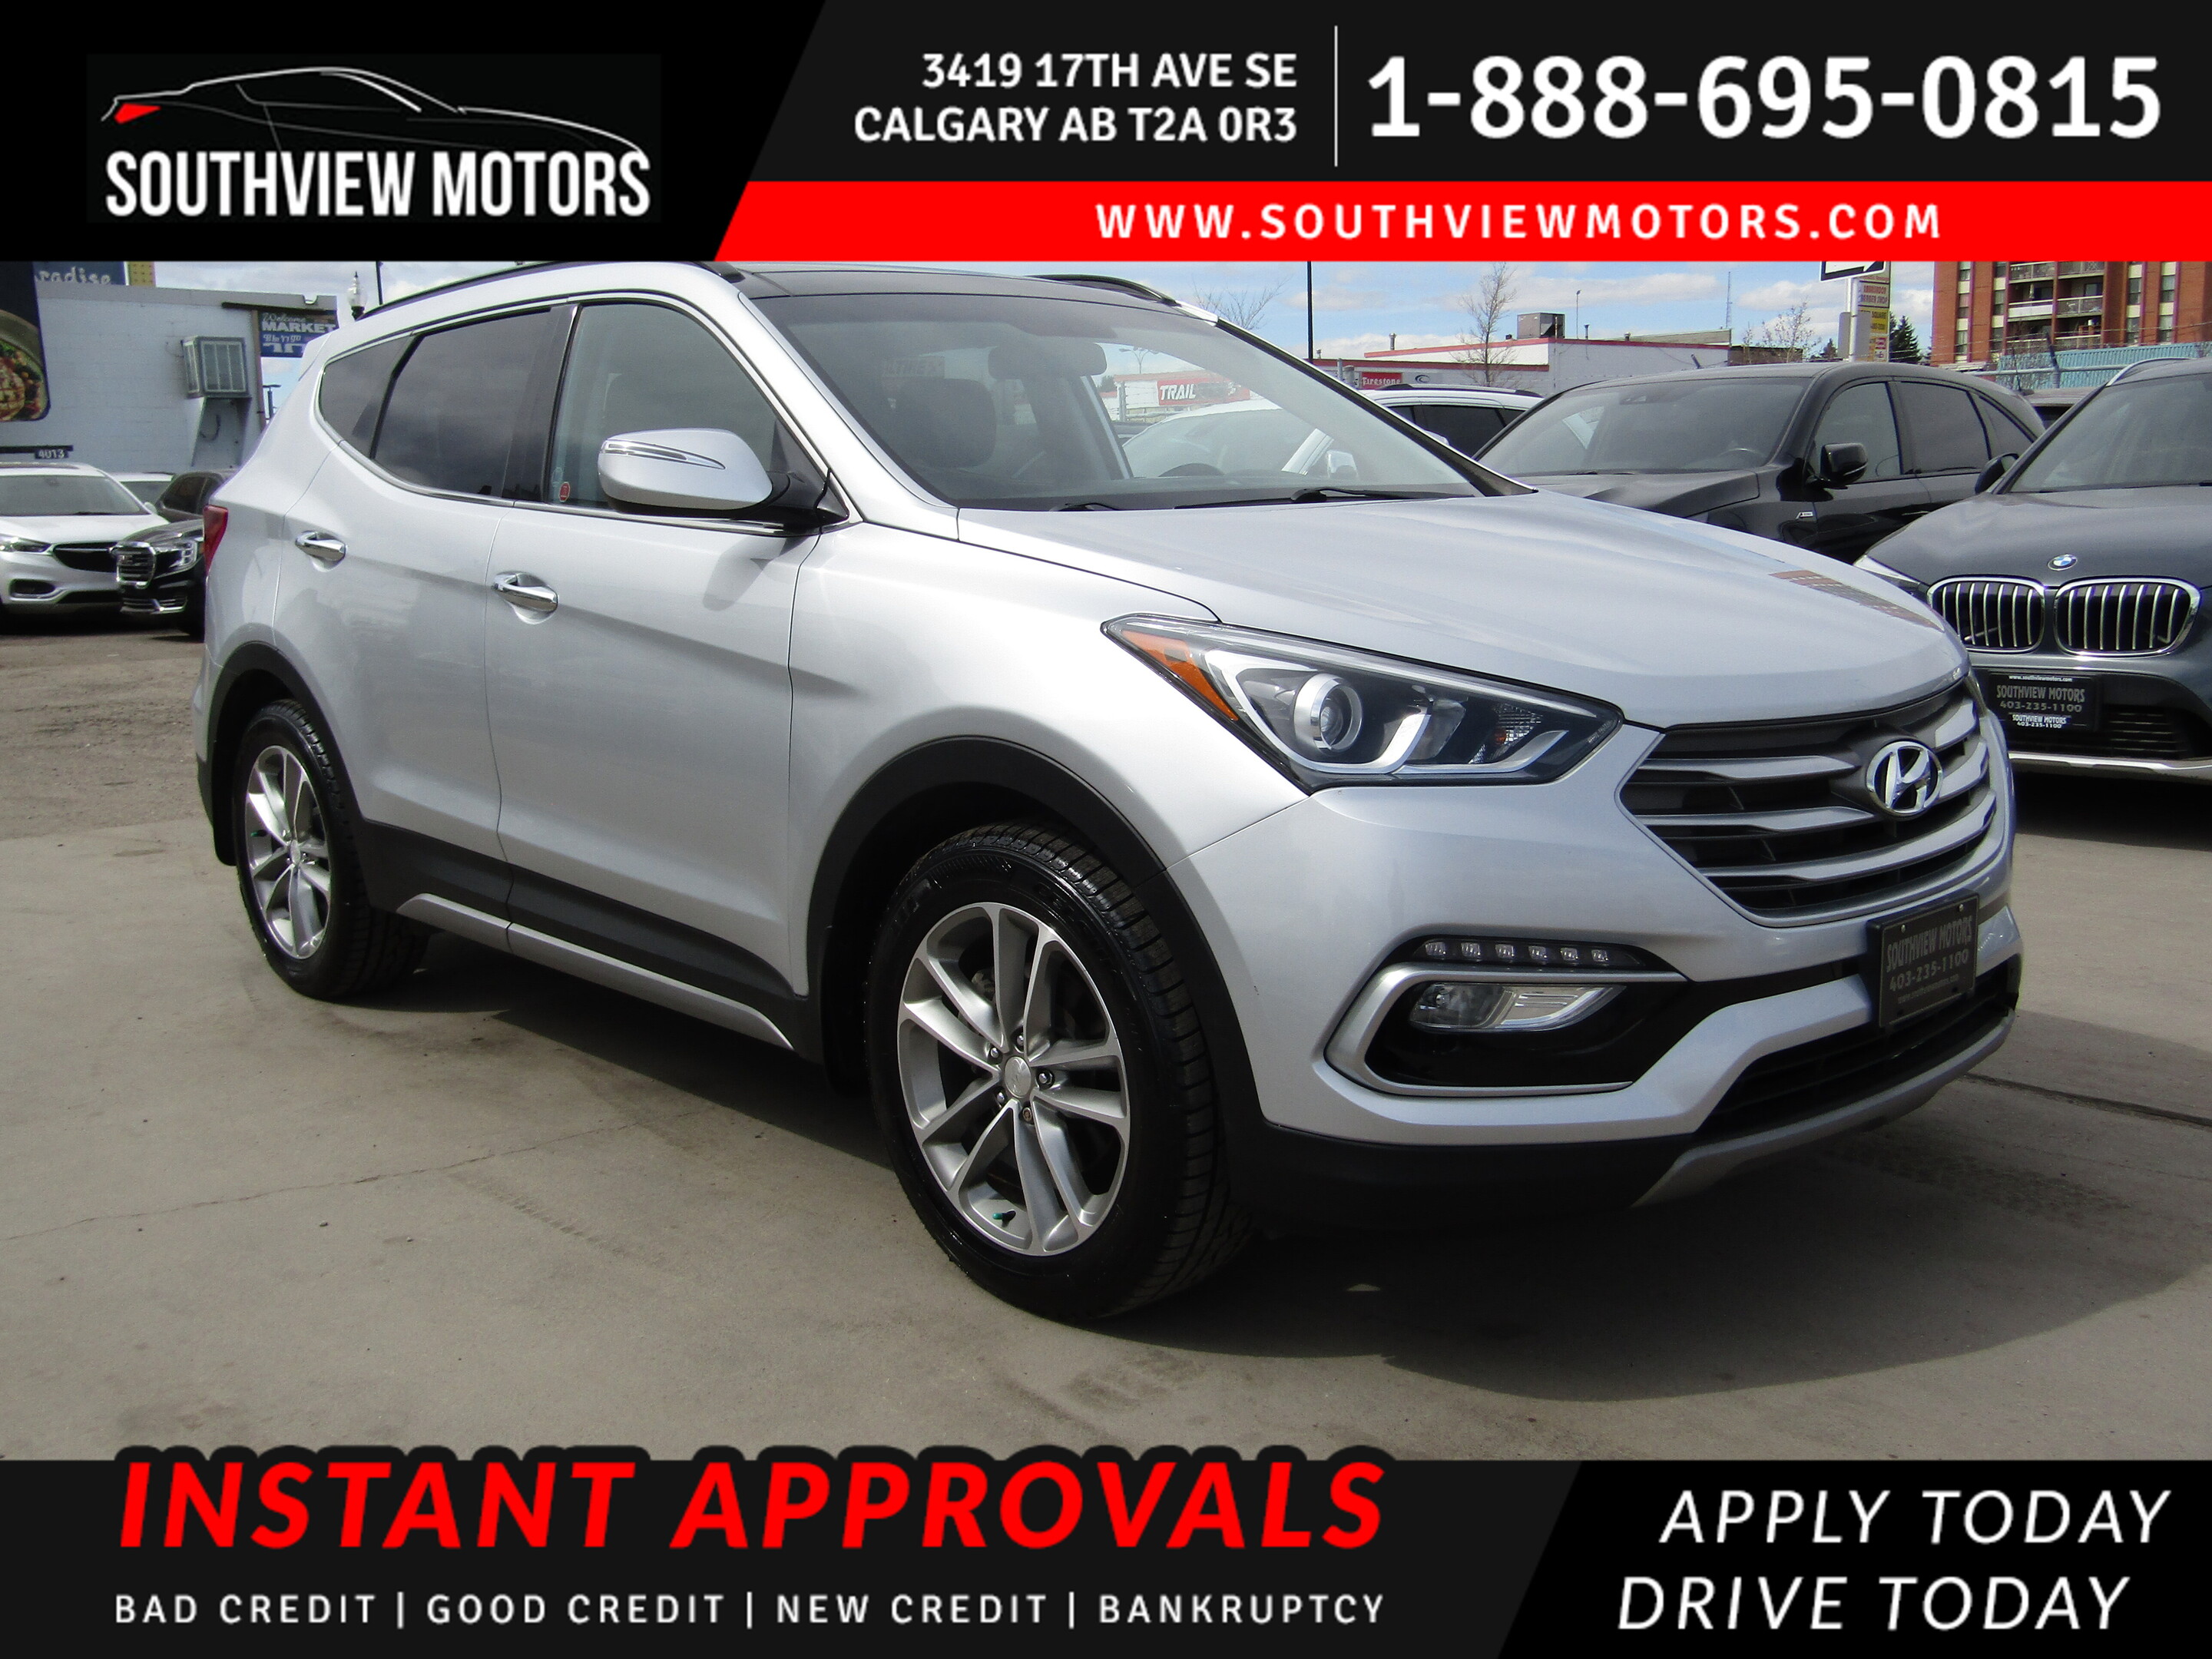 2017 Hyundai Santa Fe Sport 2.0T SE AWD B.S.A/S.ROOF/B.CAM/LEATHER/NEW TIRES 